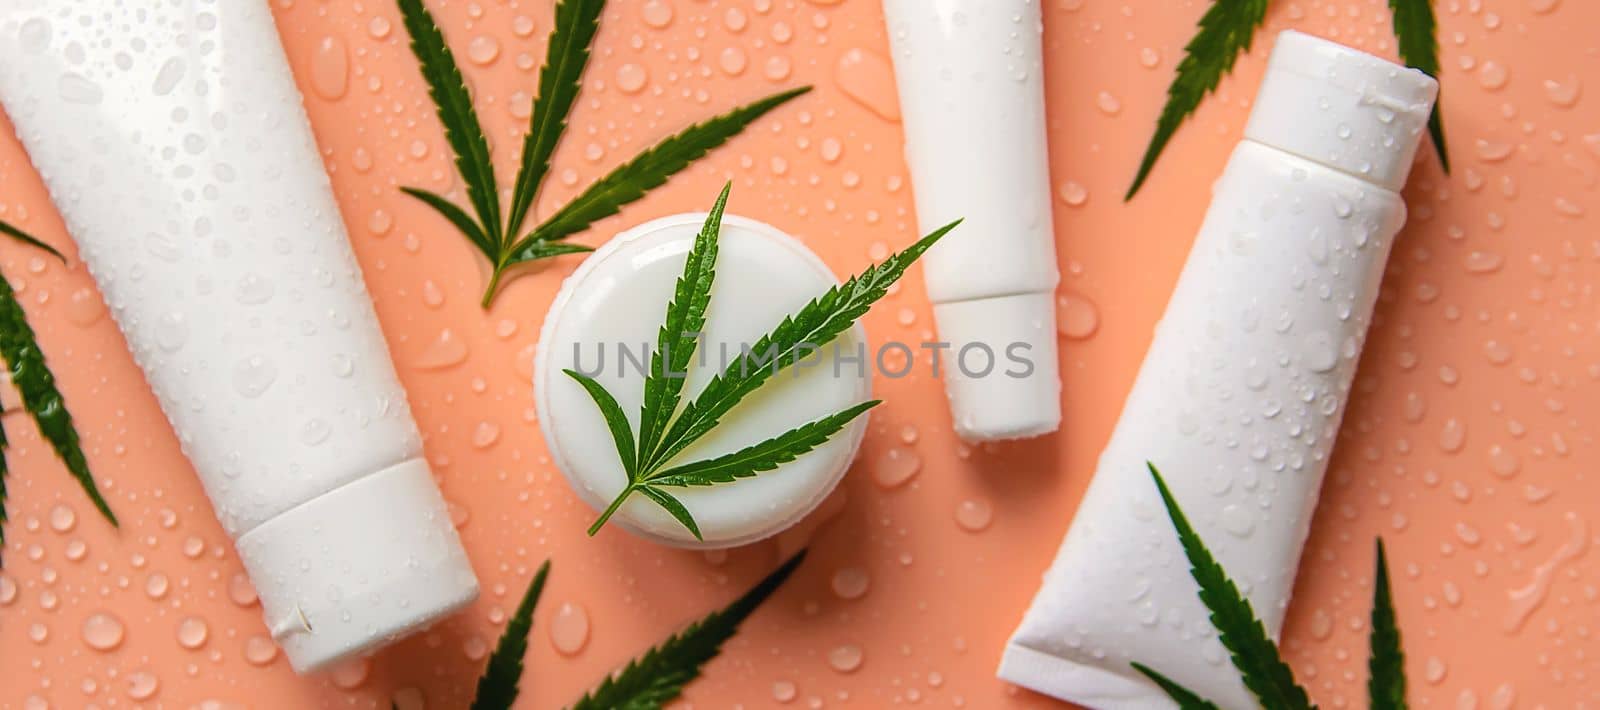 Cream of cannabis on a light background. Selective focus. Nature.